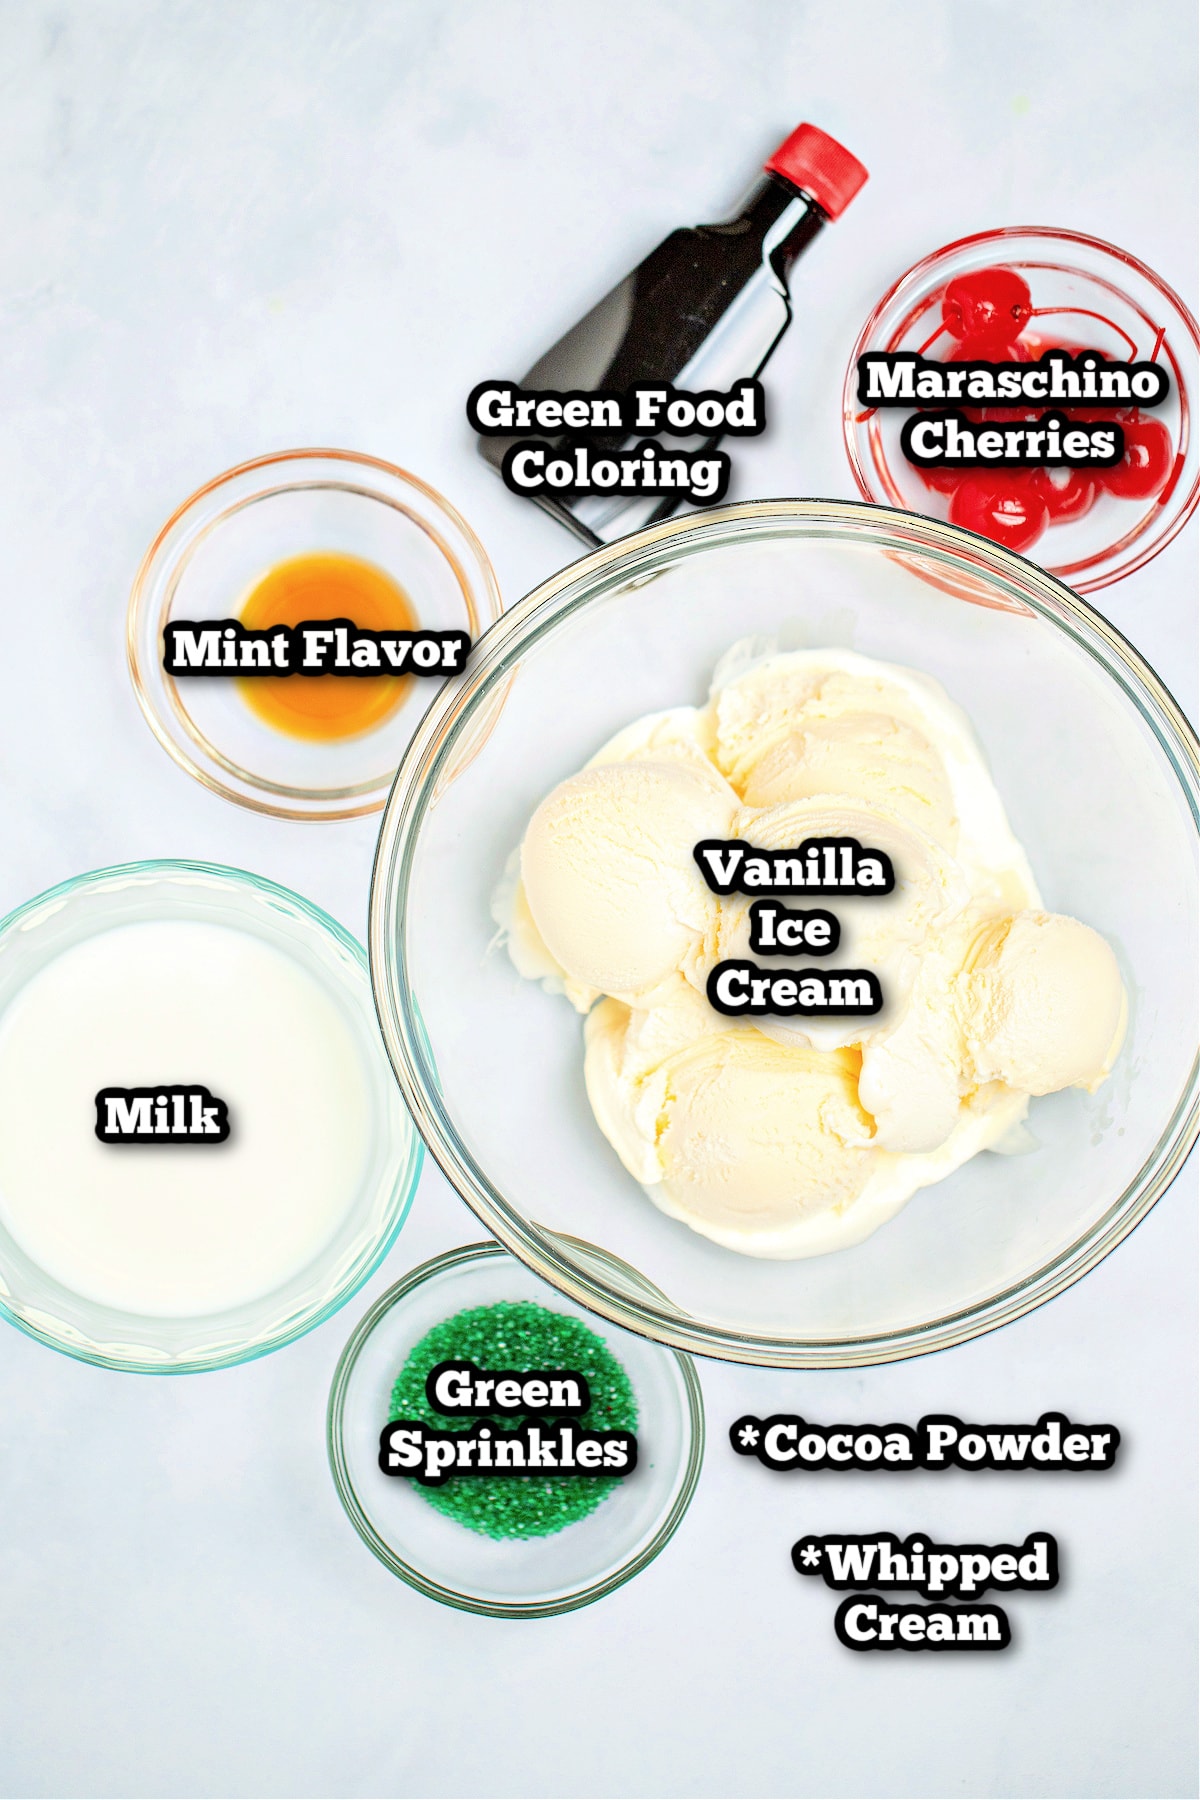 Individual ingredients for this shamrock shake recipe on a table.